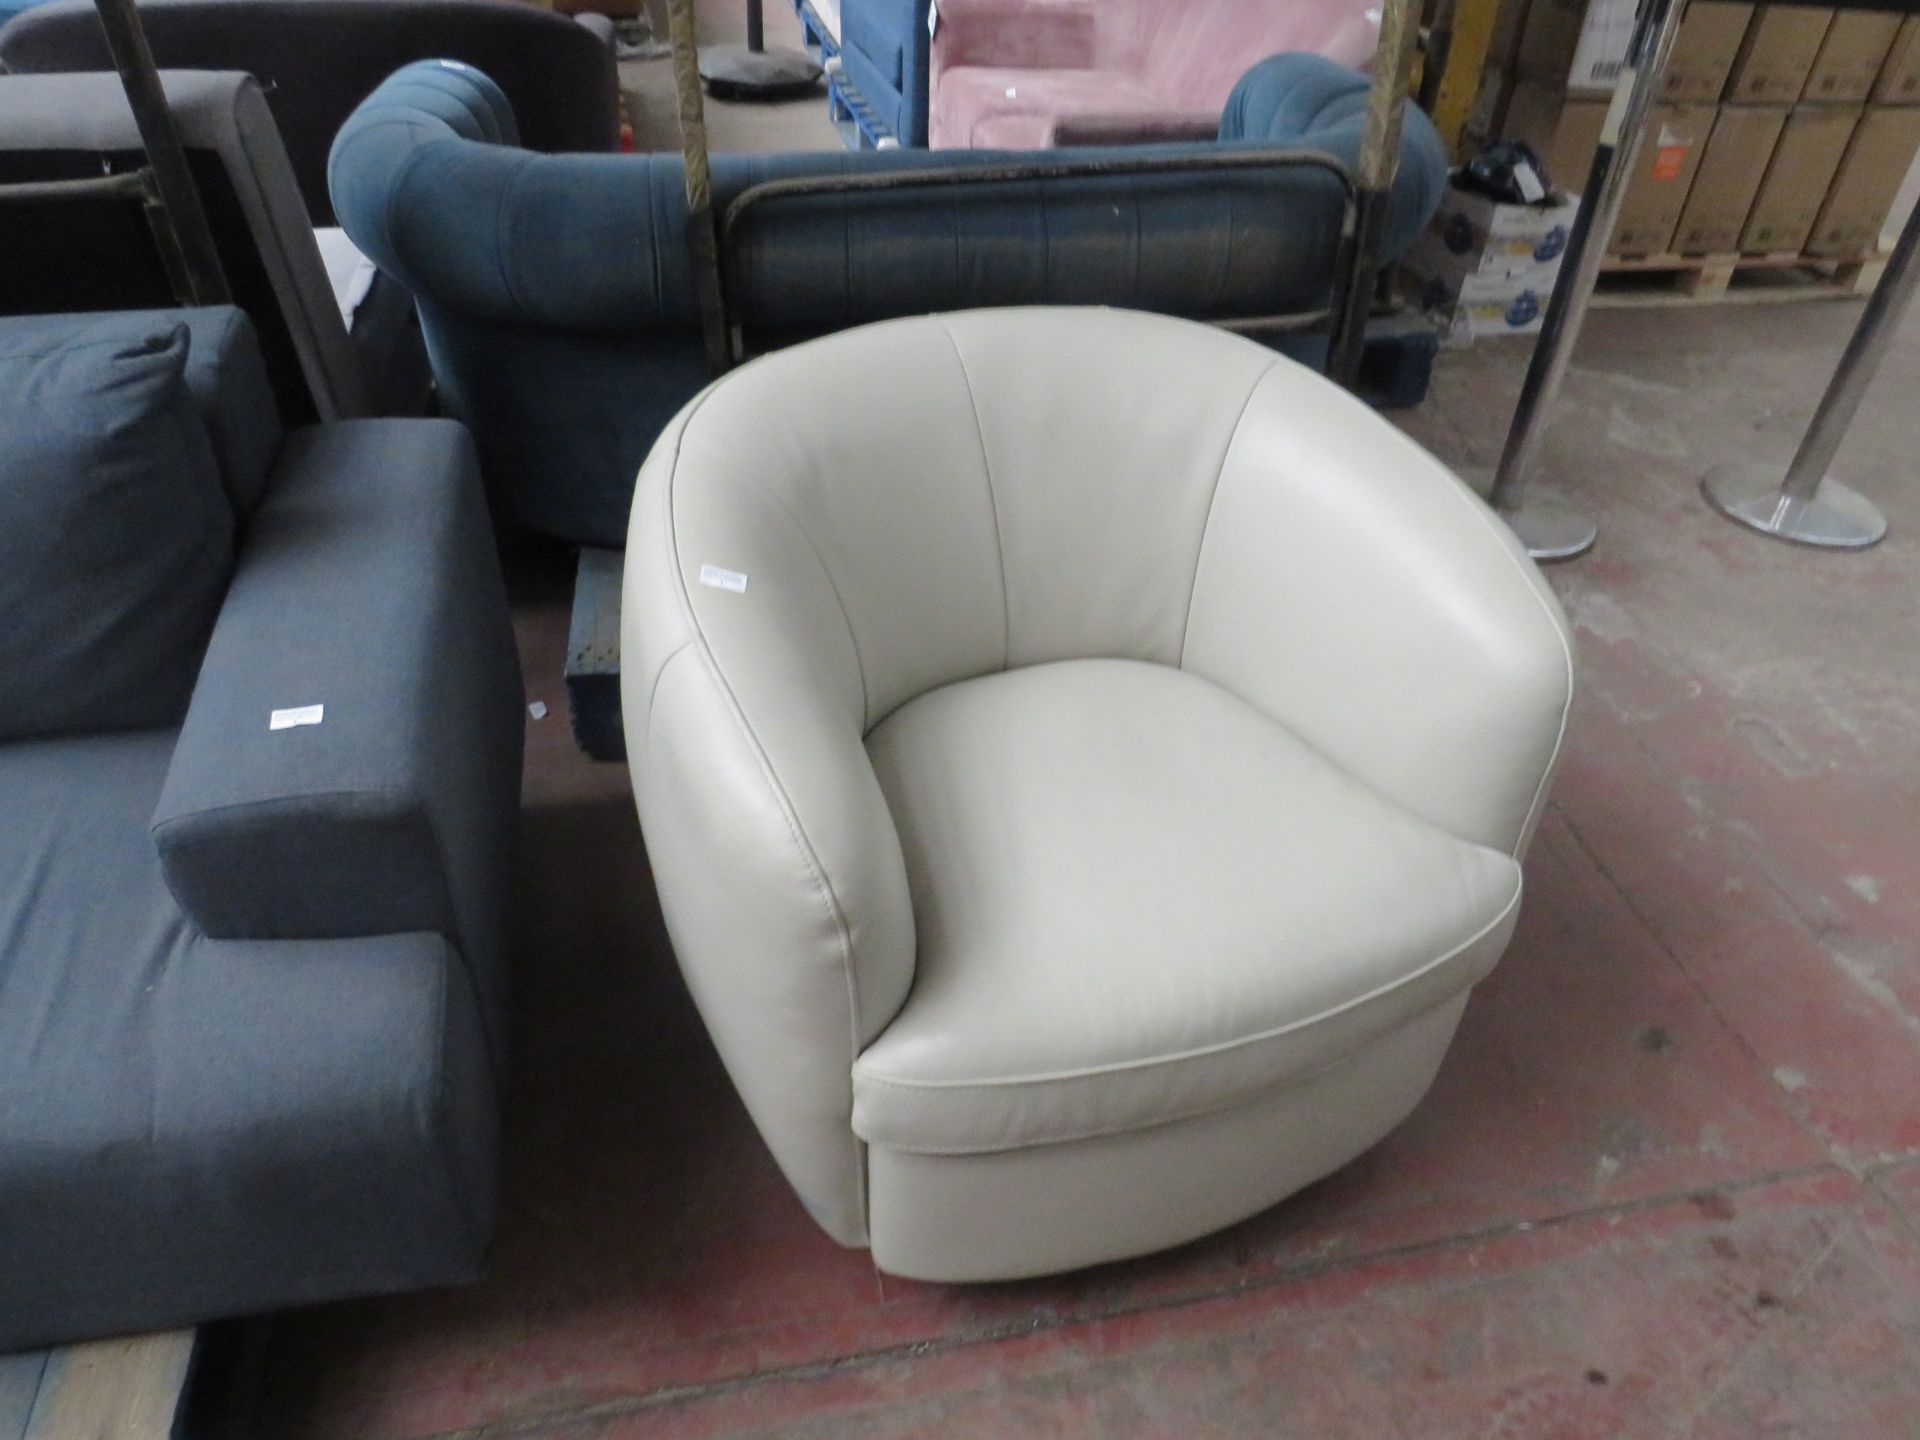 Kuka swivel tub chair, no major damage (PLEASE NOTE, THIS DOES NOT PROVIDE ANY WARRANTY OR GUARANTEE